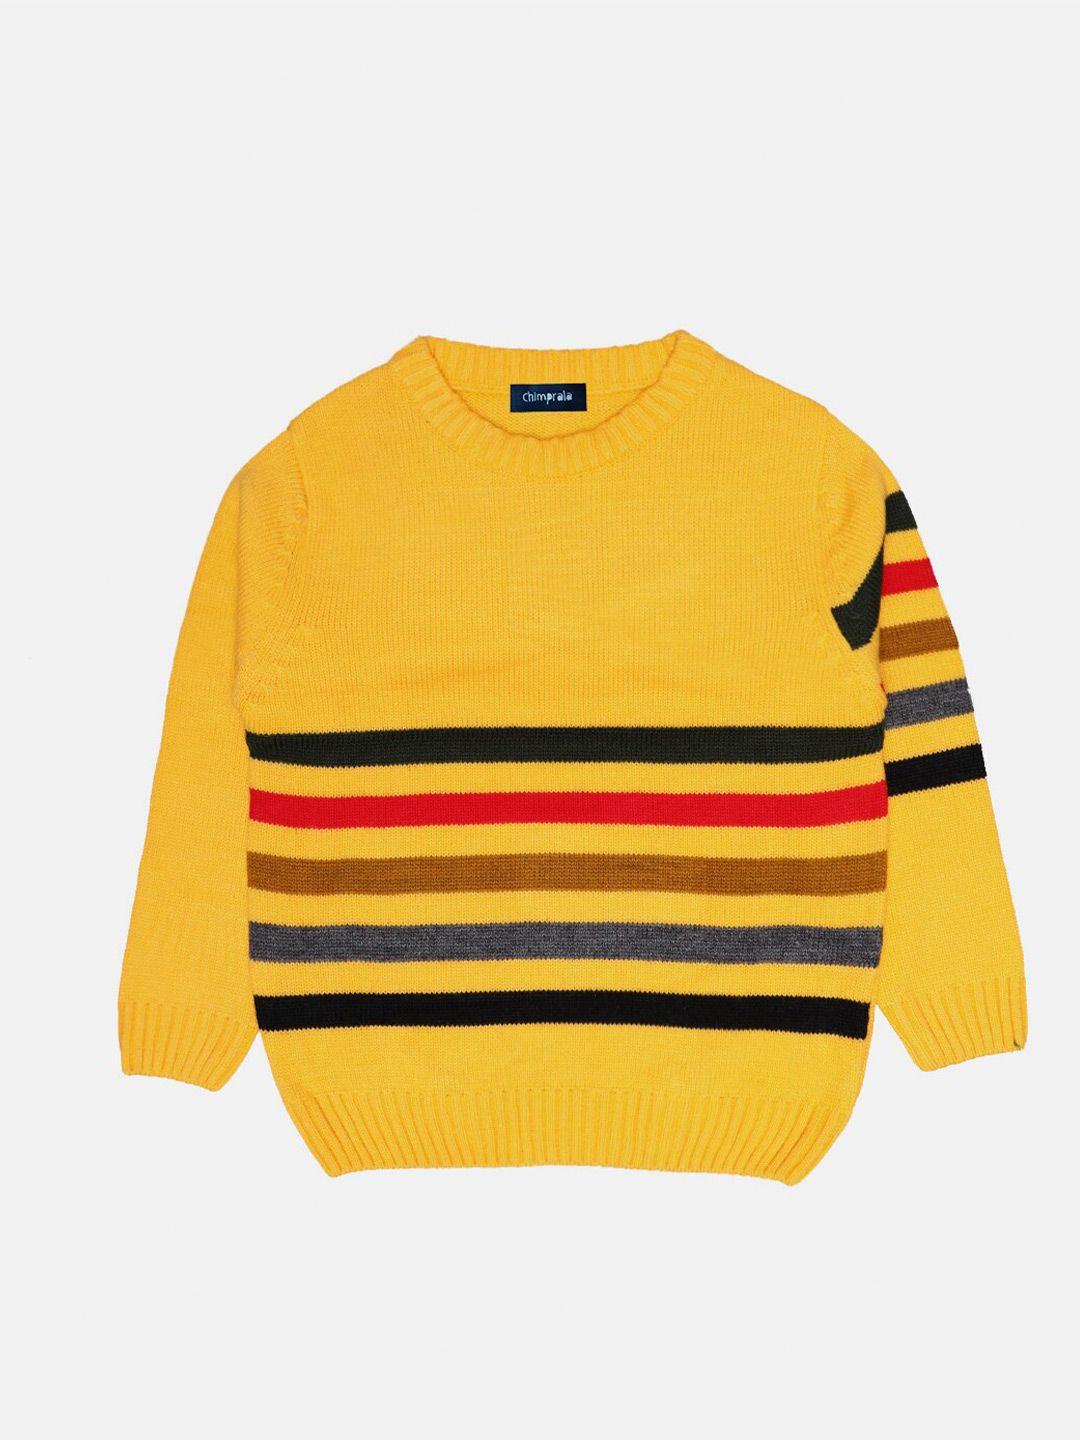 chimprala boys yellow & red striped pullover